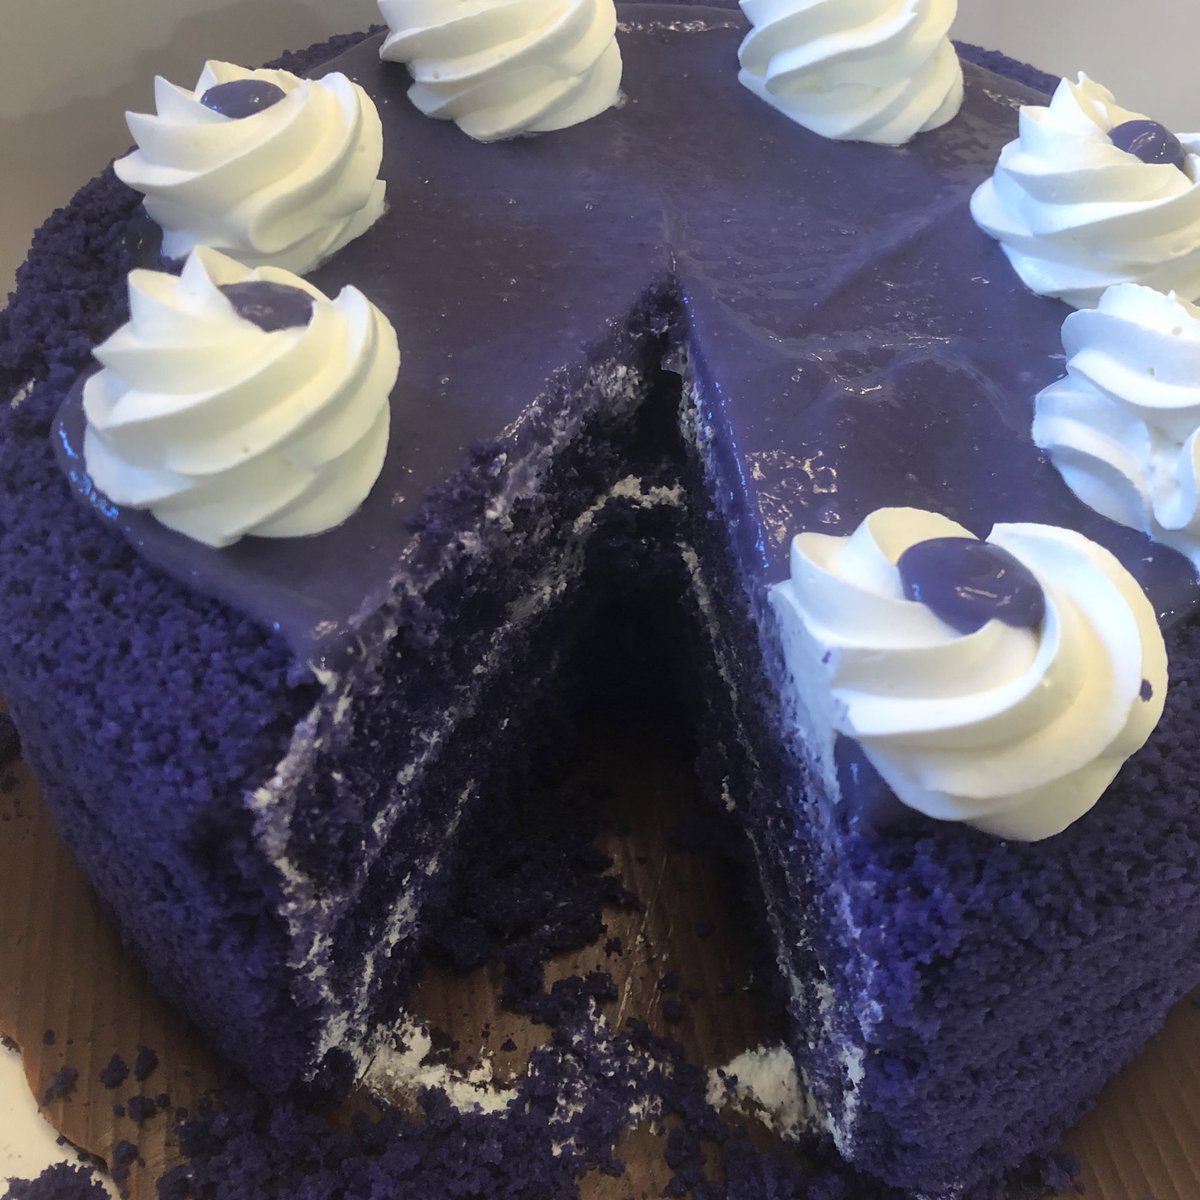 Consumption of ube cake has commenced.